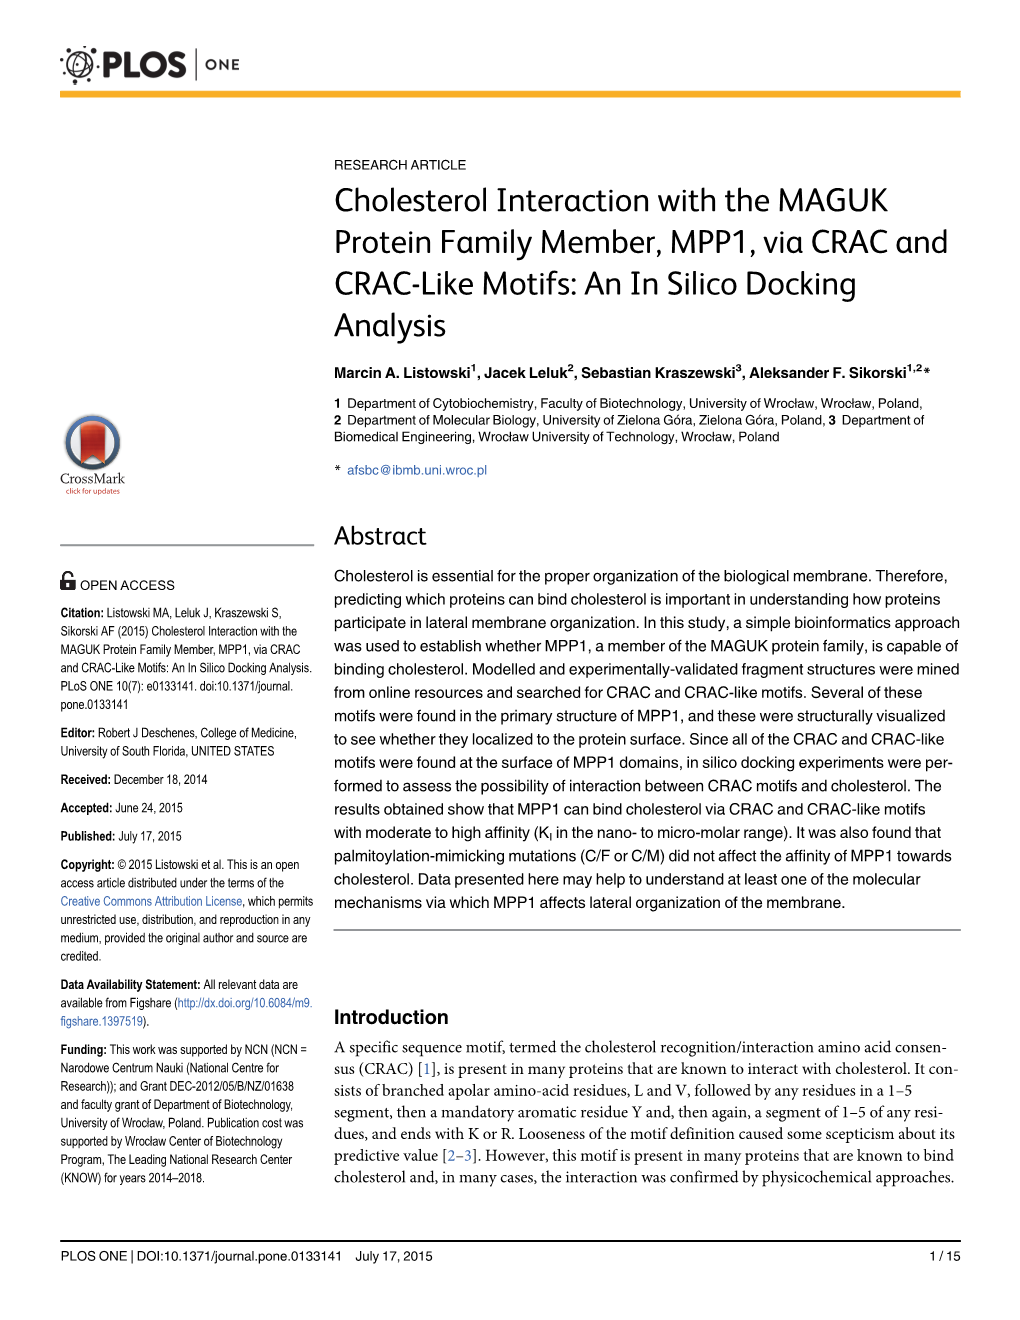 Cholesterol Interaction with the MAGUK Protein Family Member, MPP1, Via CRAC and CRAC-Like Motifs: an in Silico Docking Analysis